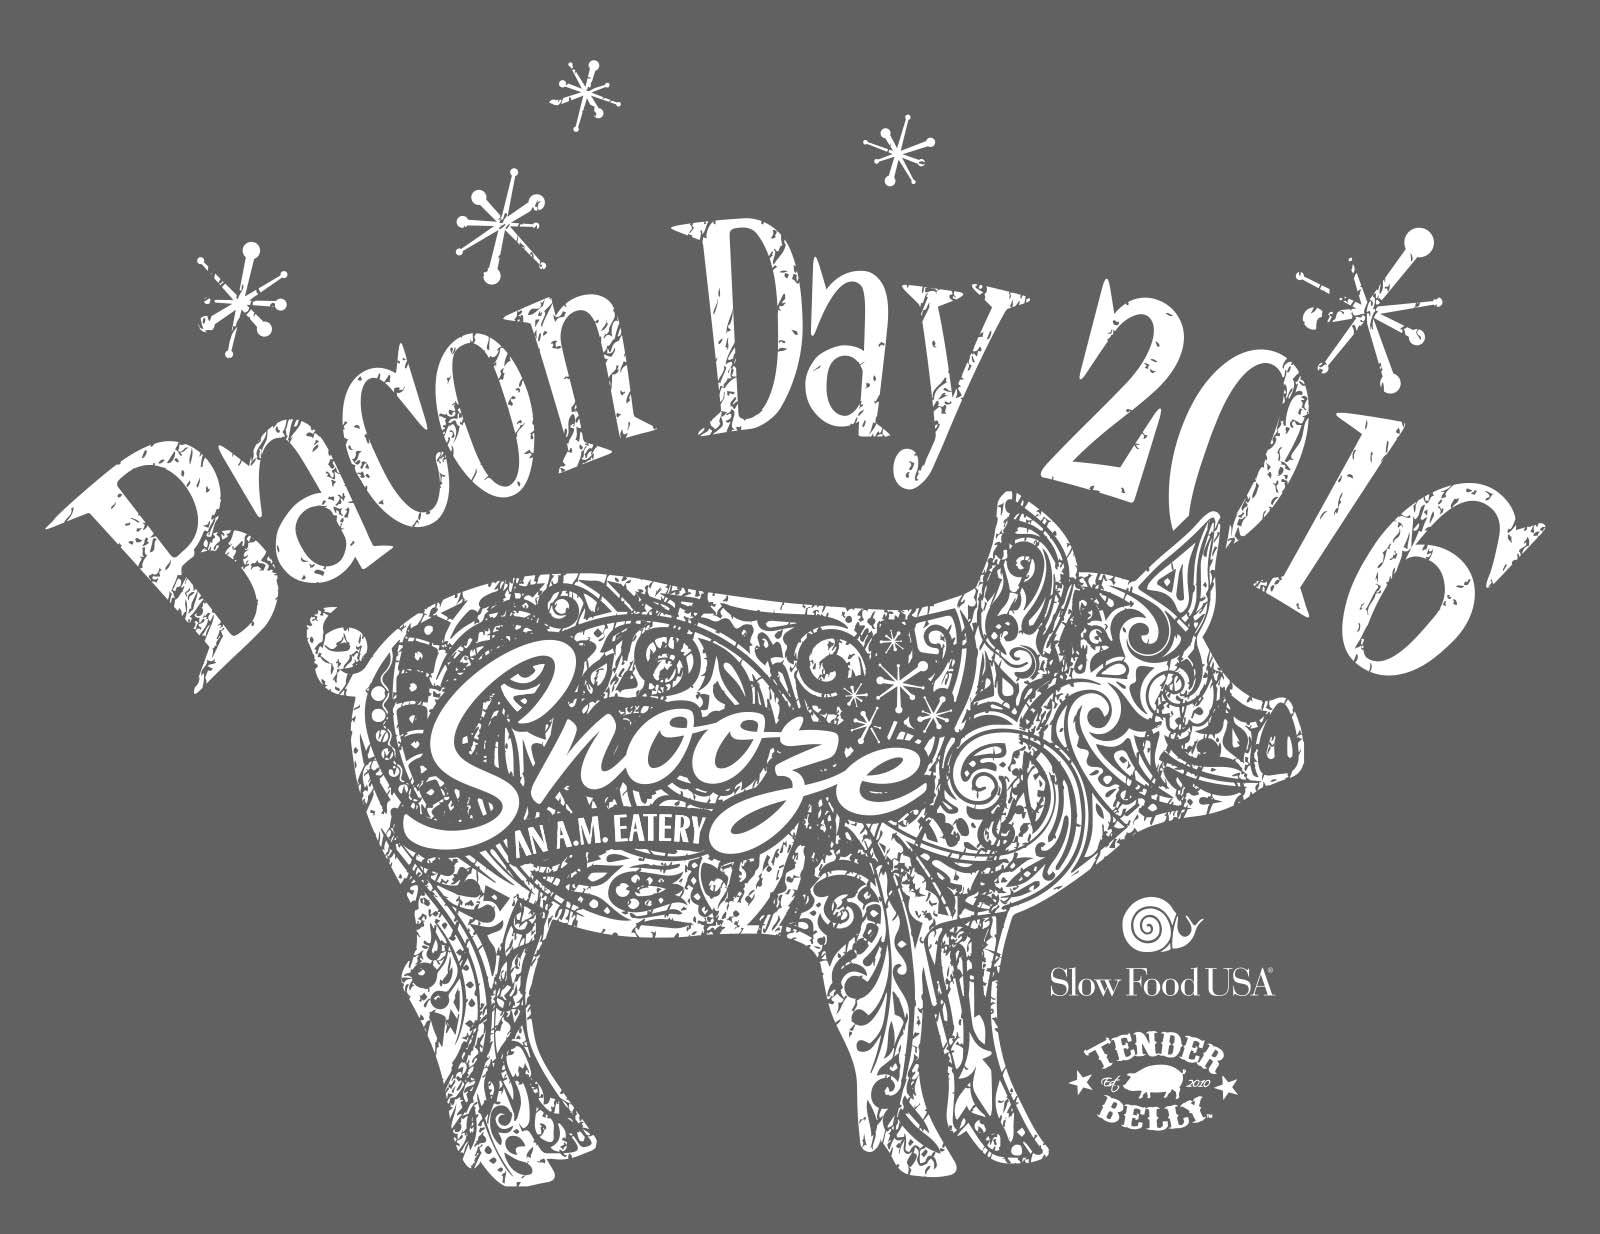 BACONDAY2016-Wh